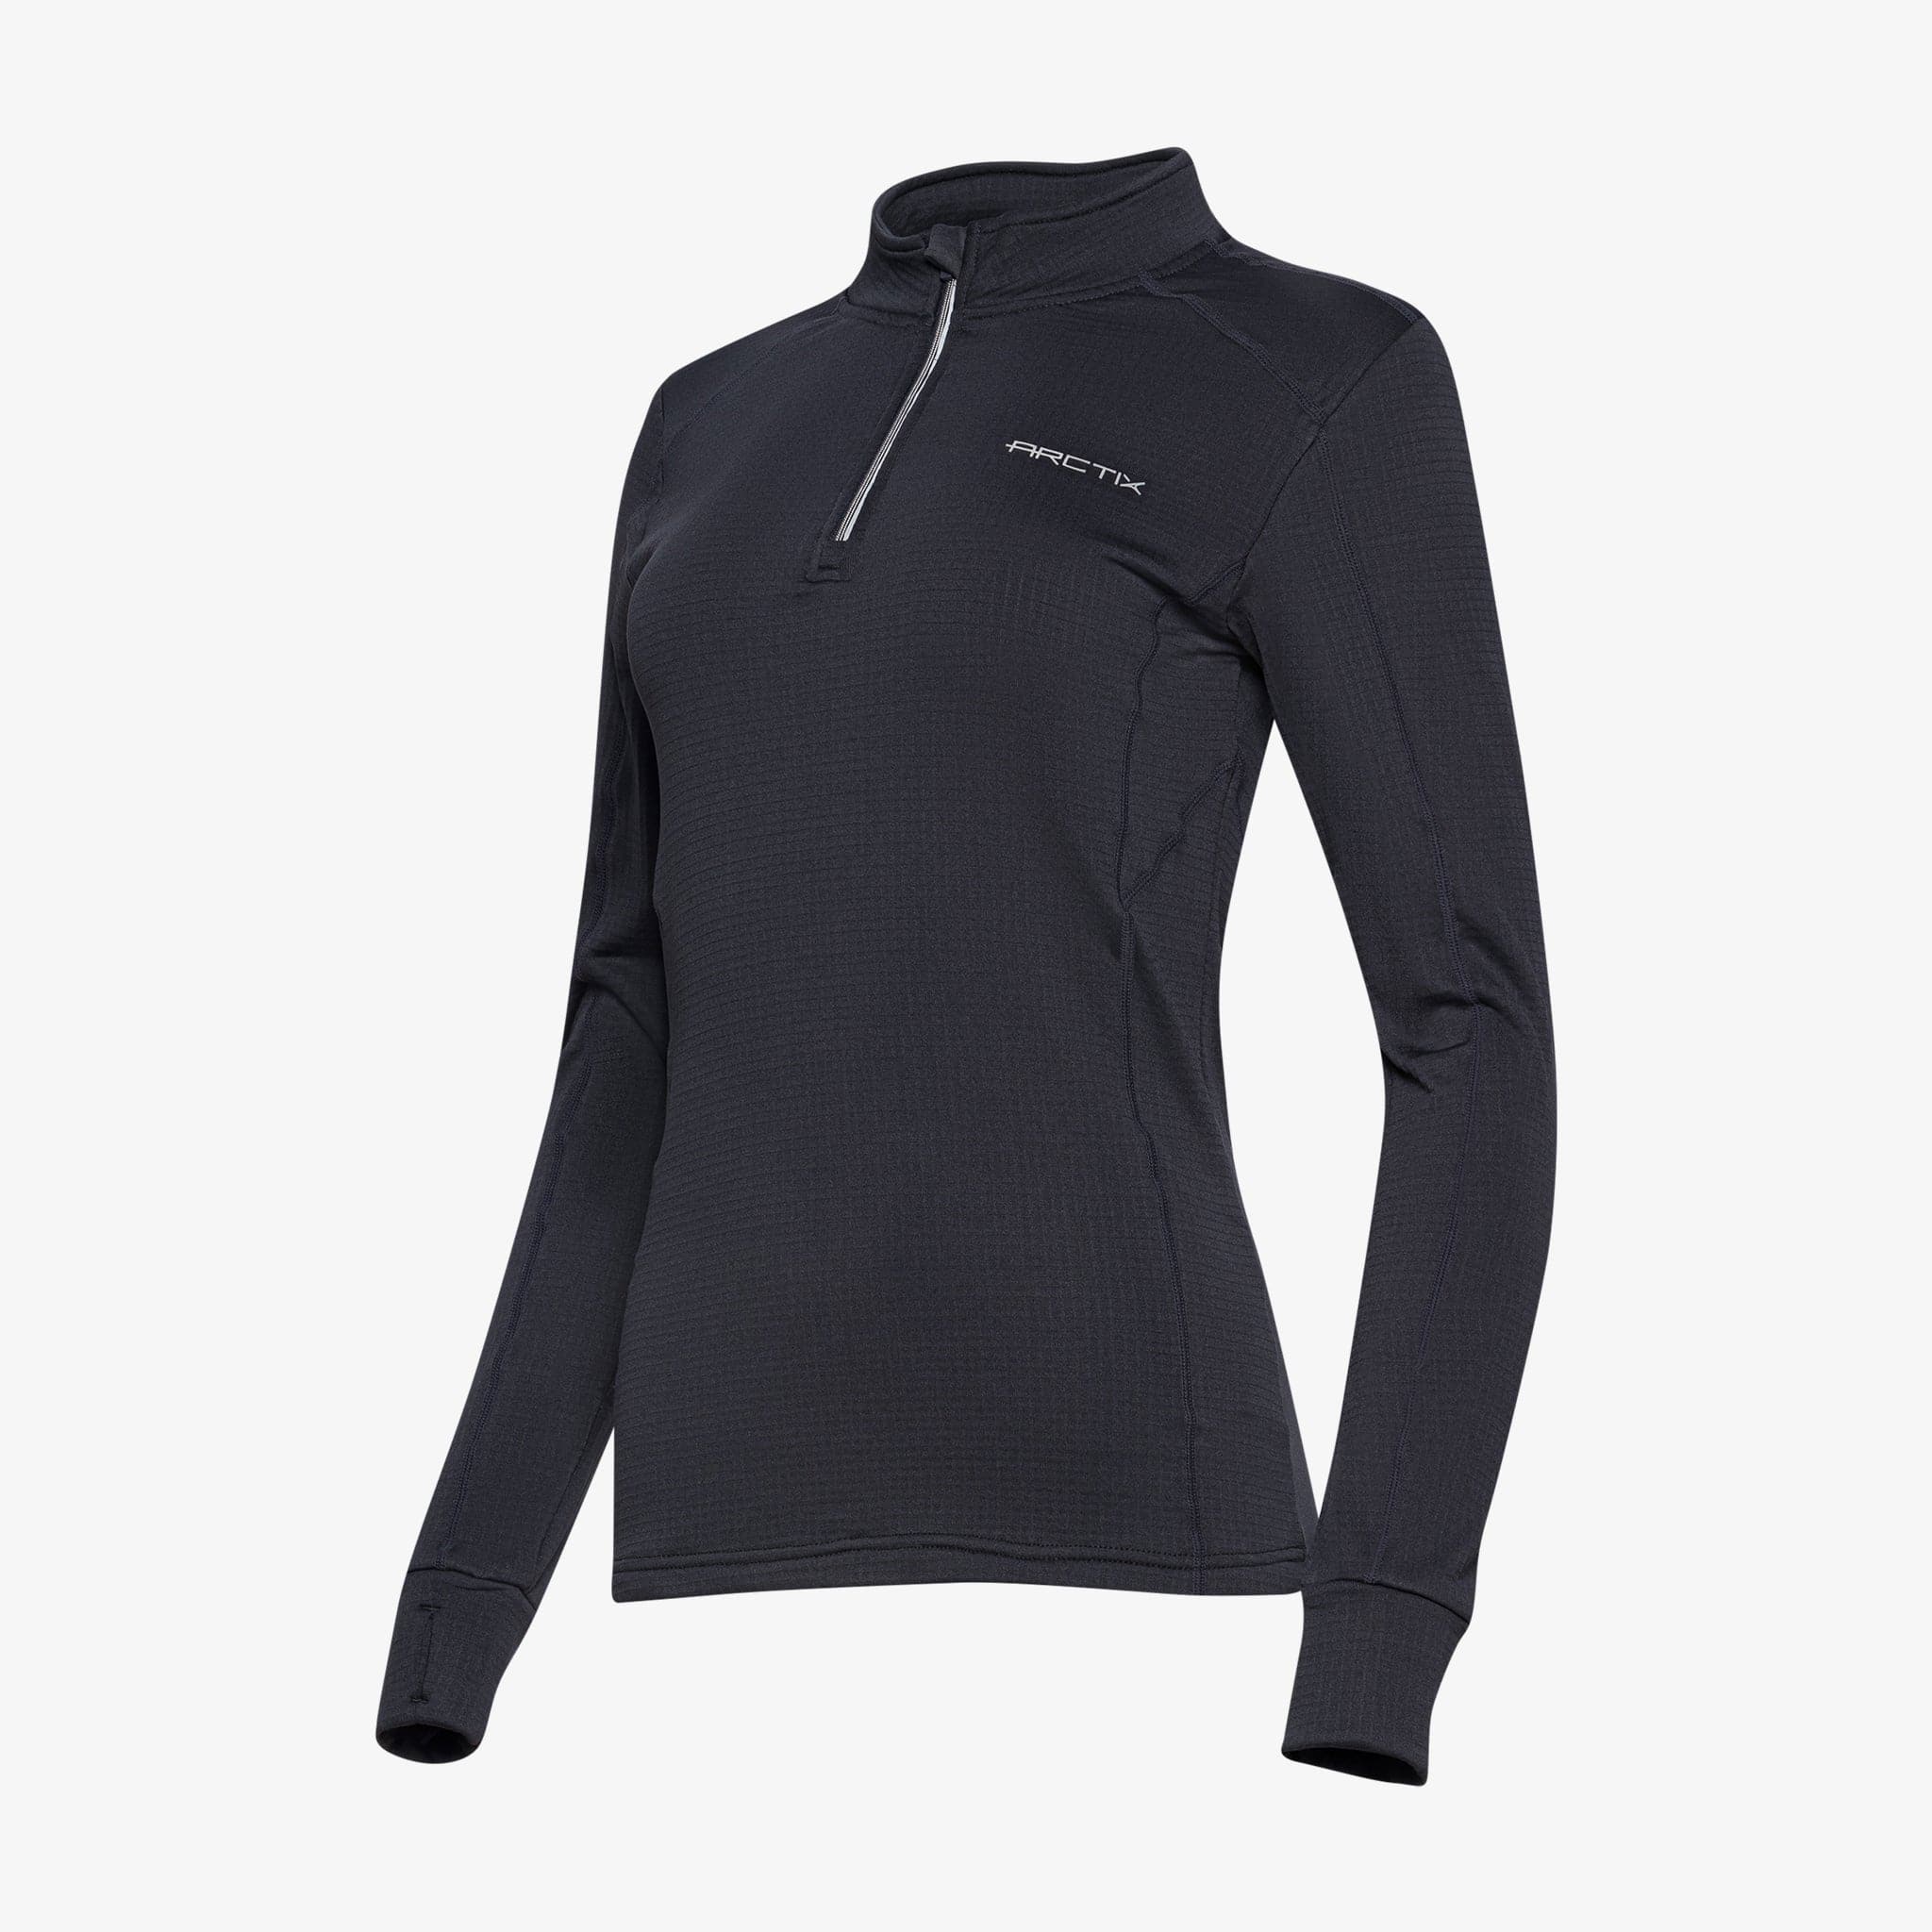 Shop for men's, women's and kids Arctix base layers.